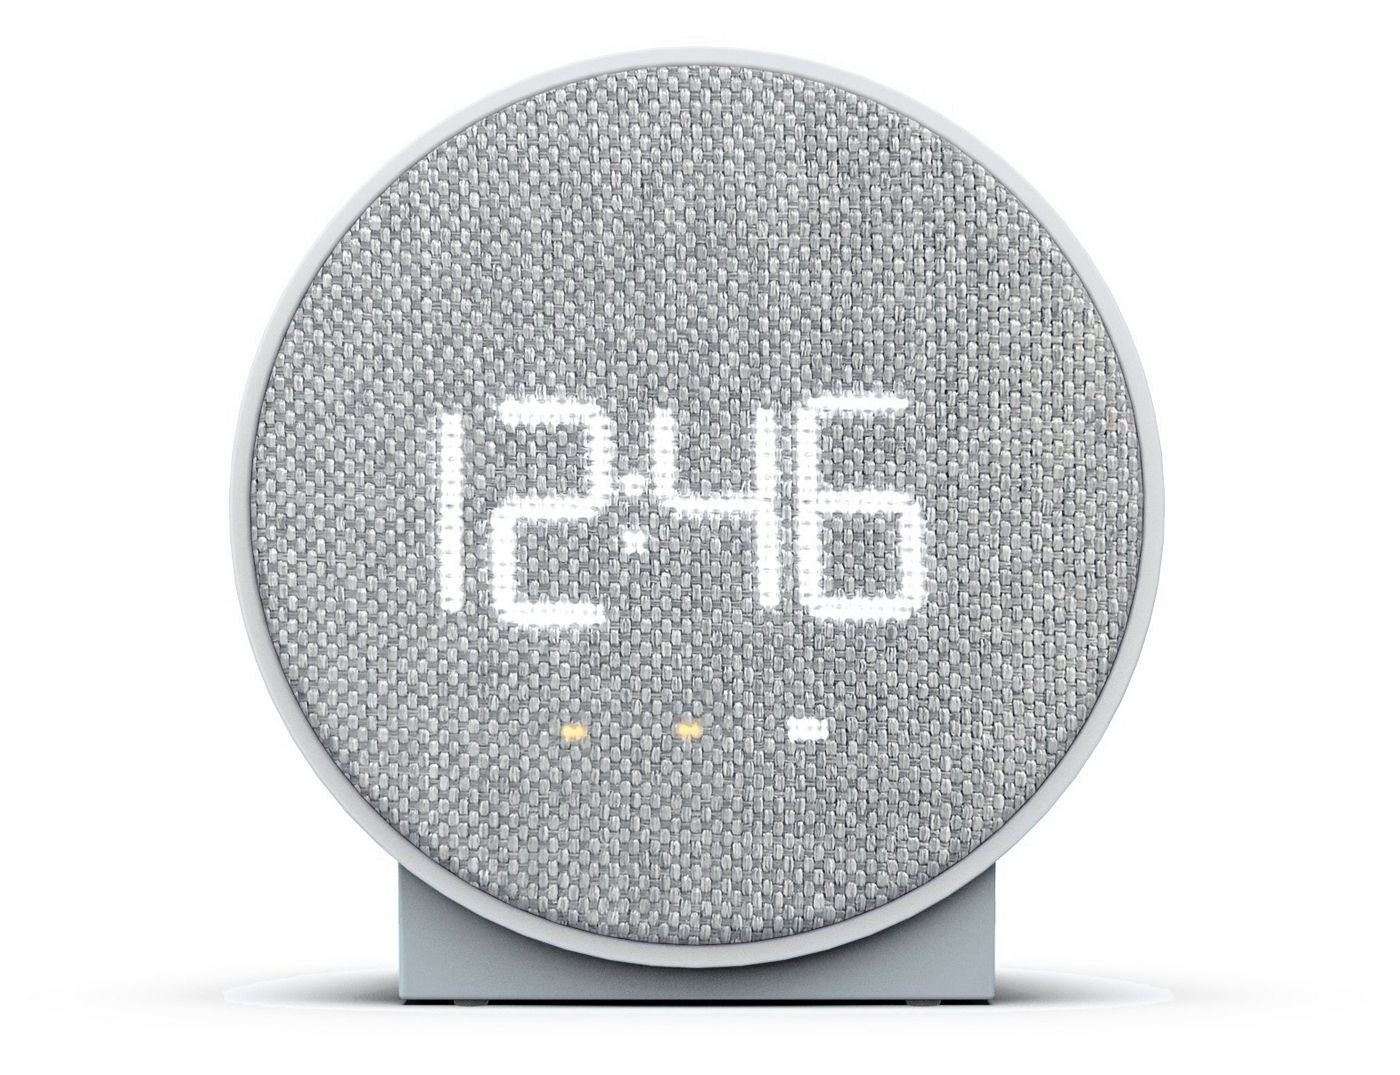 grey round alarm clock showing the time